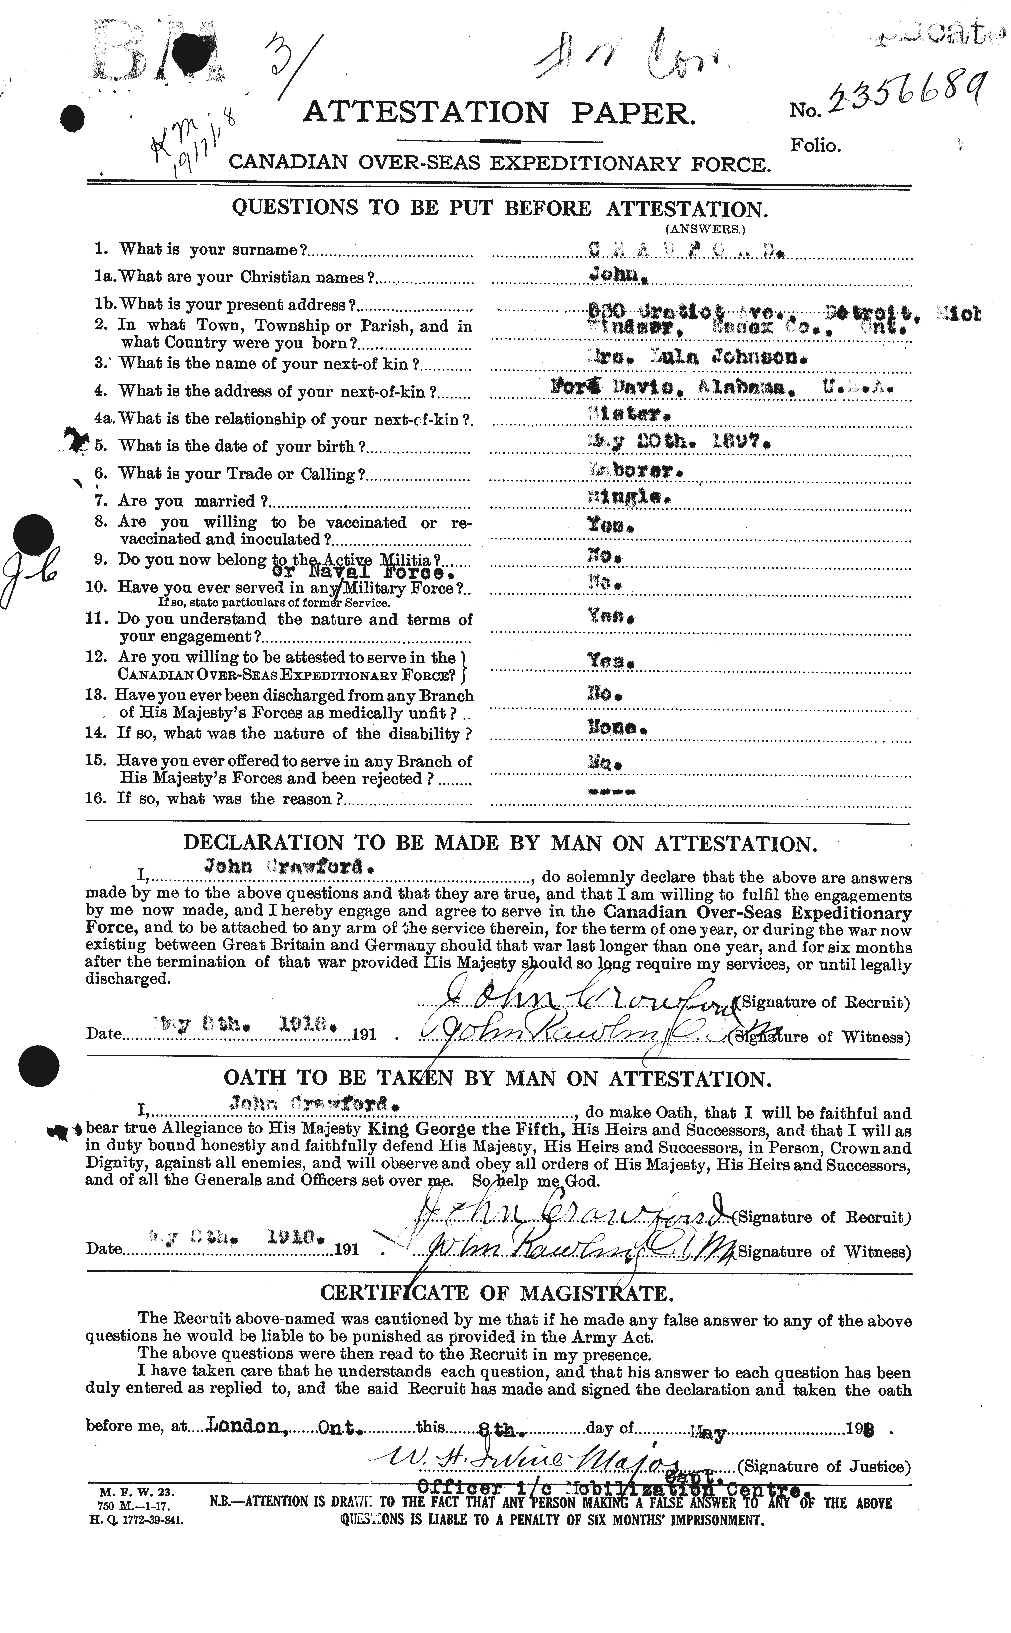 Personnel Records of the First World War - CEF 062459a